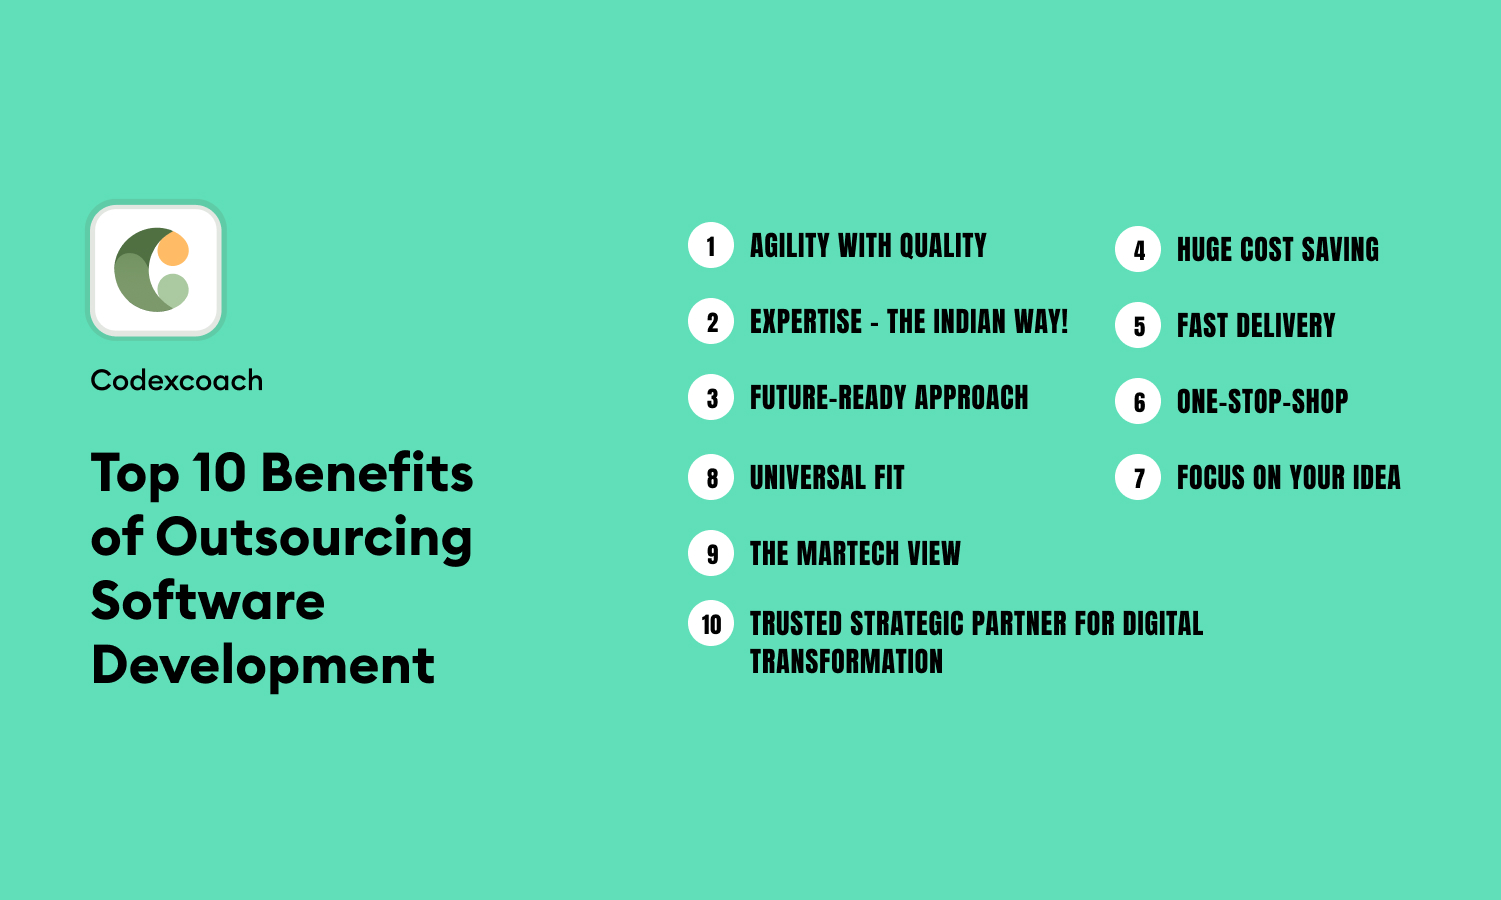 Top 10 Benefits of Outsourcing Software Development